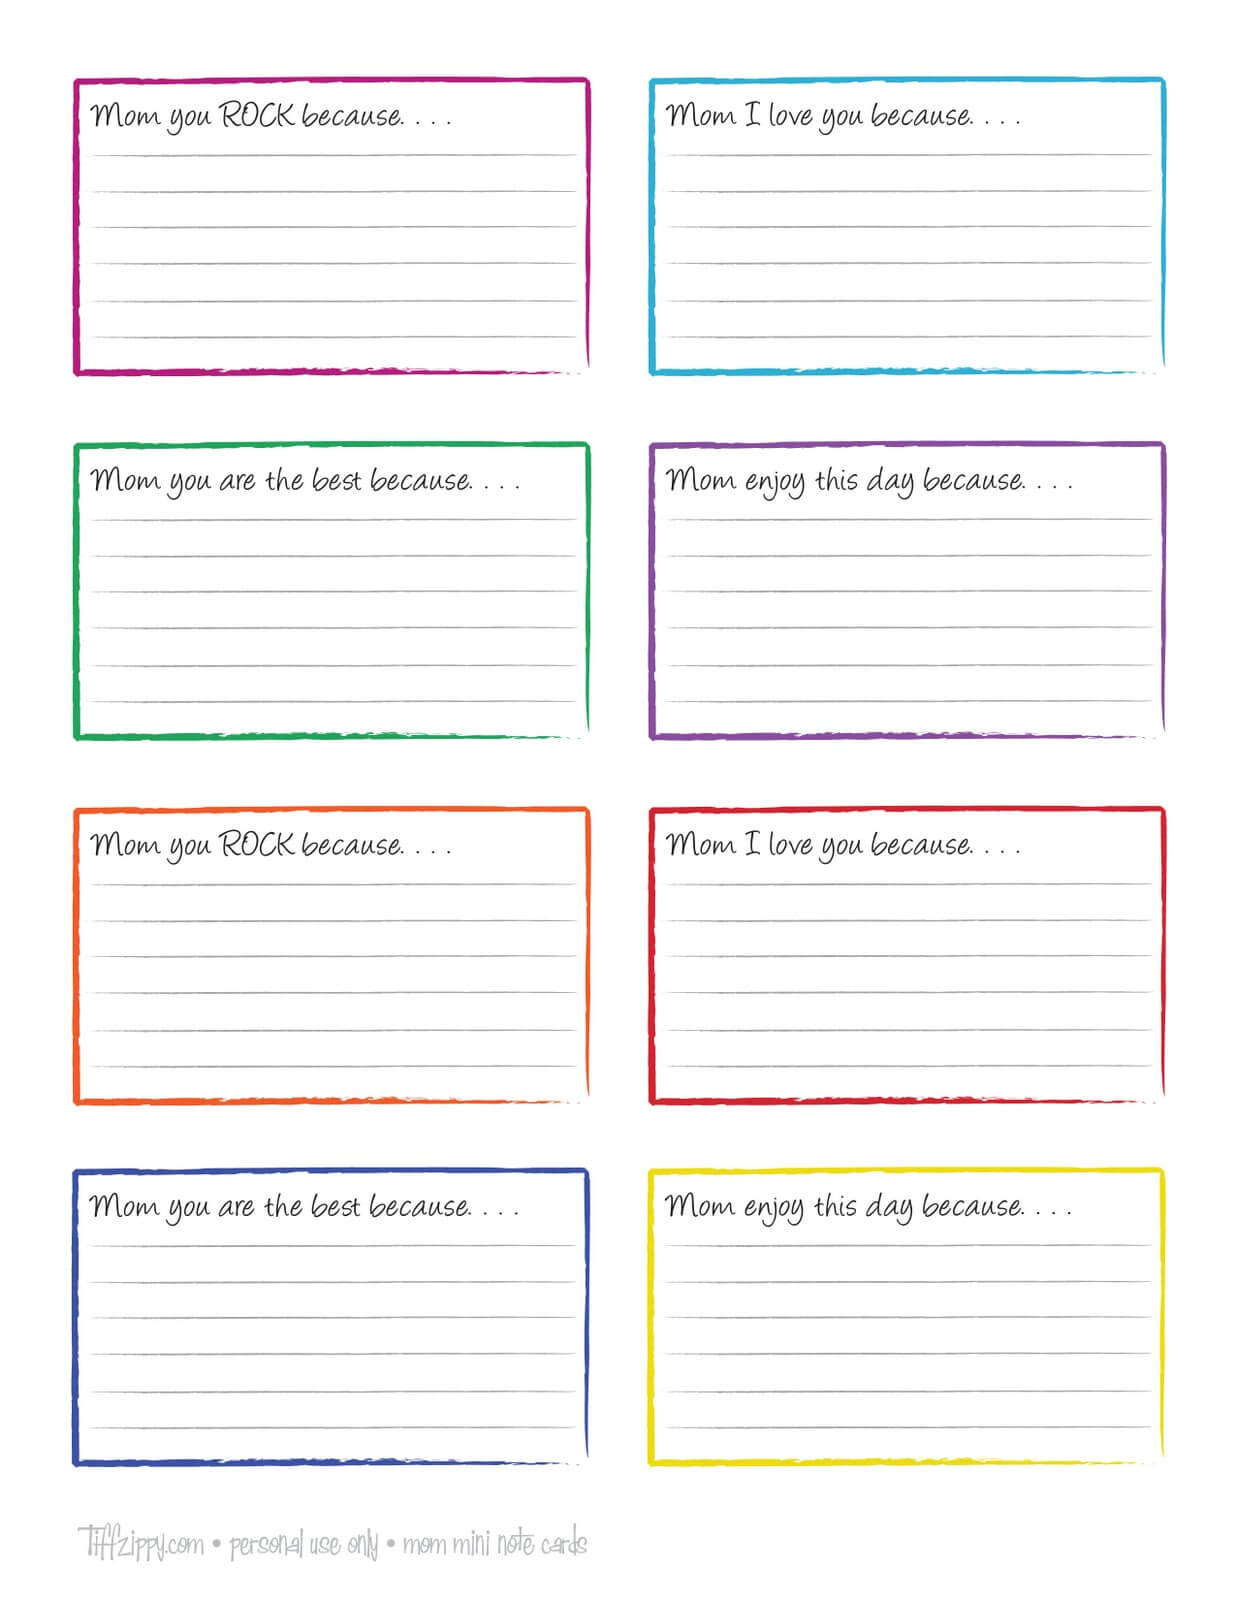 wonderful-microsoft-word-index-card-template-3x5-leapfrog-letter-factory-flashcards